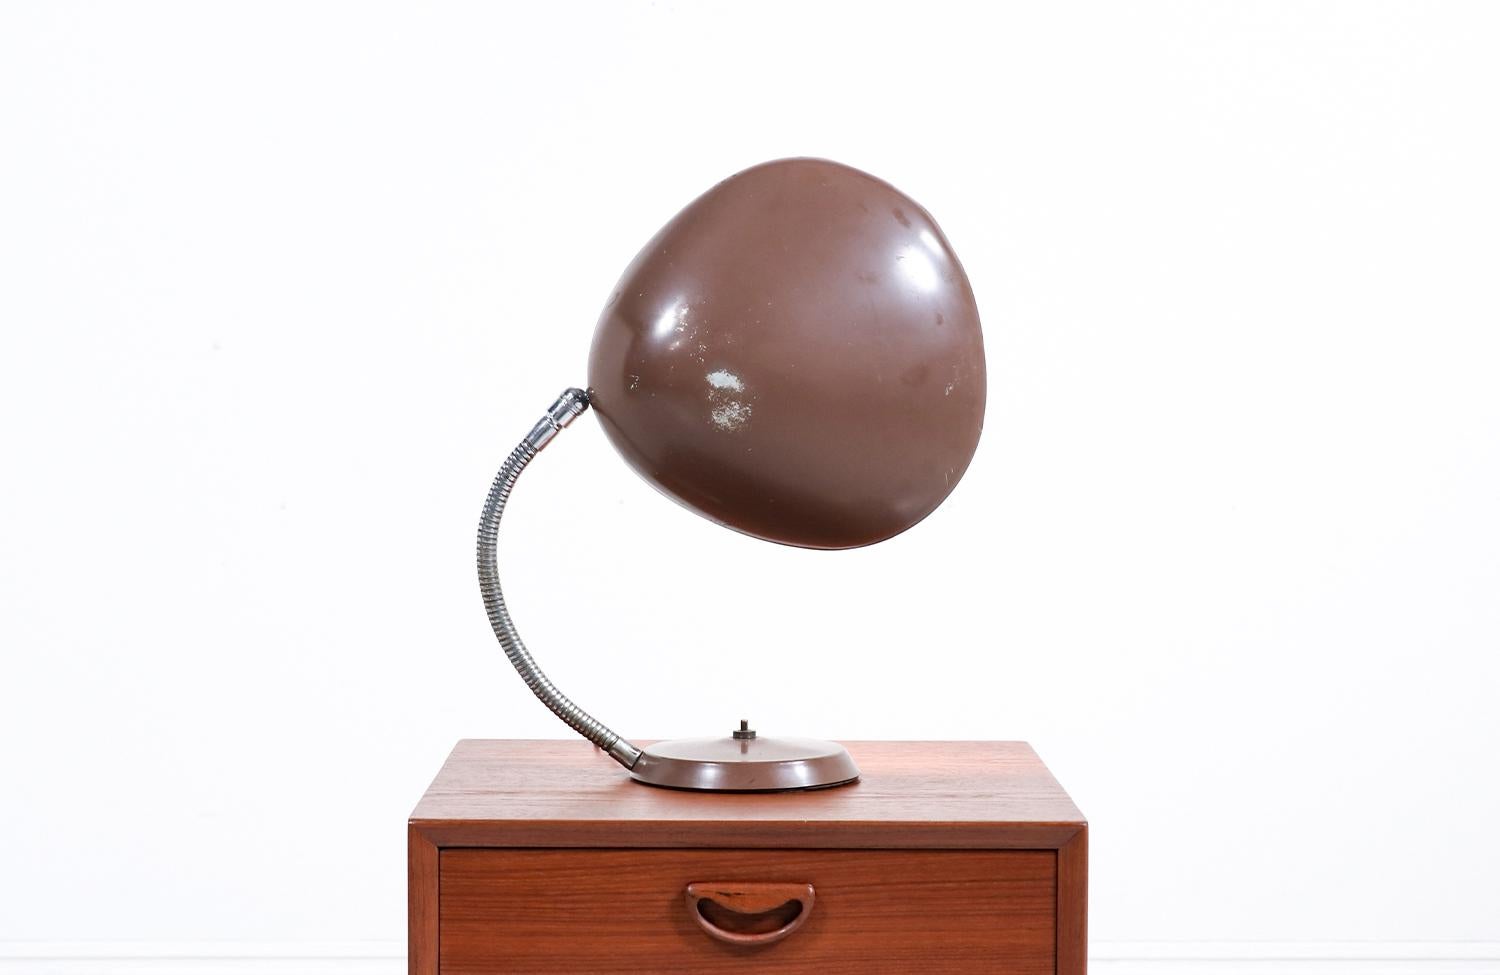 The “Cobra” table lamp designed by Greta M. Grossman for Ralph O. Smith in the United States in 1948. A true icon of Mid-Century modern lighting design and winner of the MoMA Good Design award in 1950, this sophisticated table lamp features an